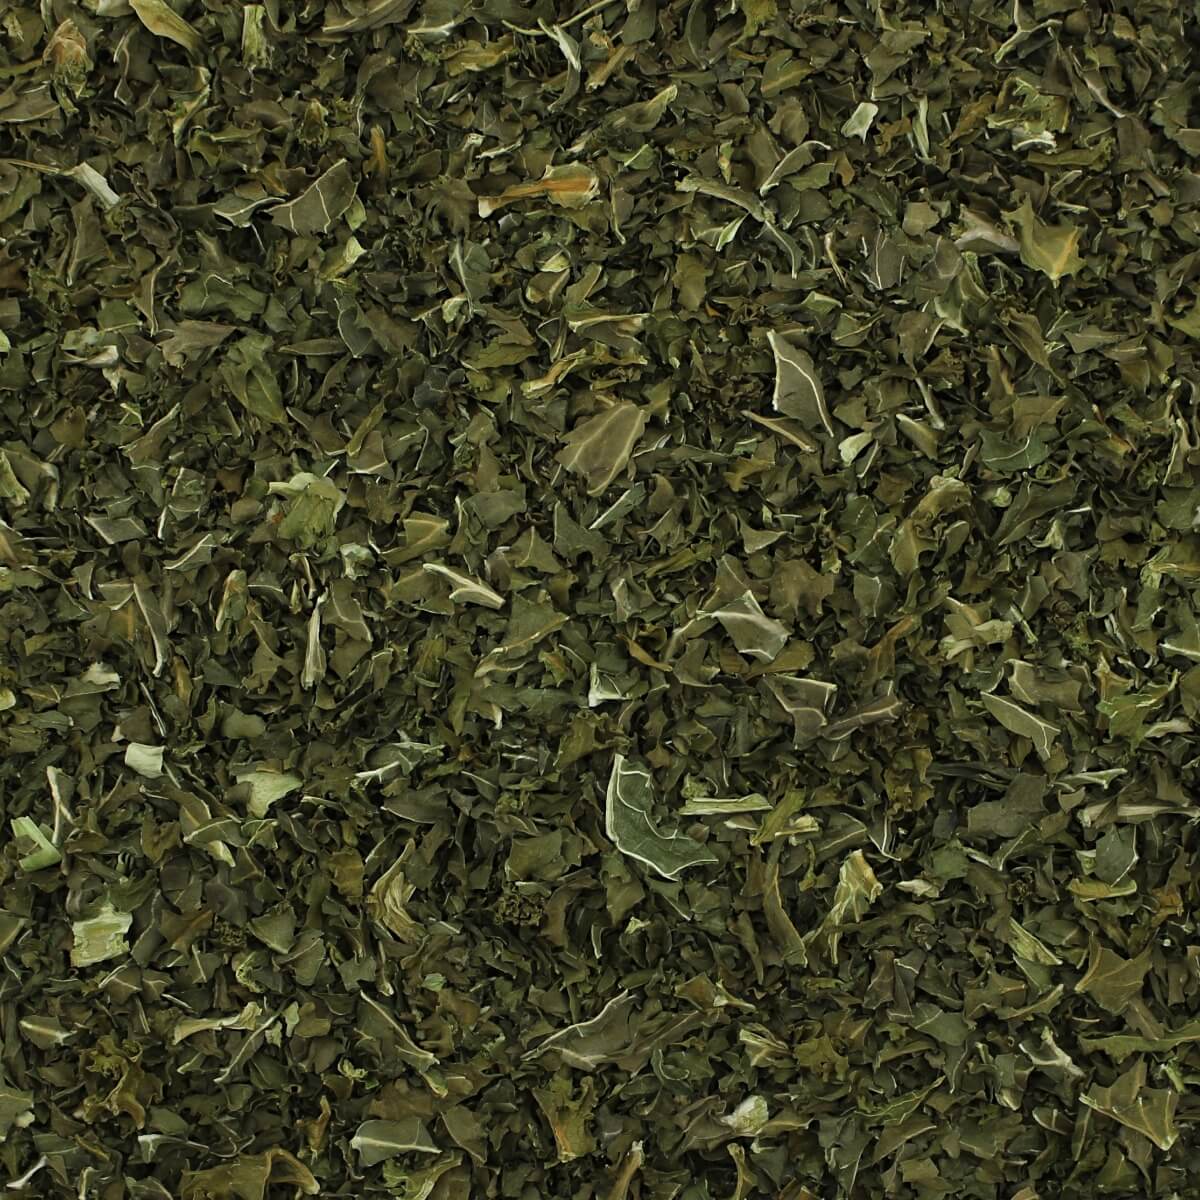 A close up of a pile of green leaves suitable for Harmony House Organic Vegetable Pantry Stuffer.